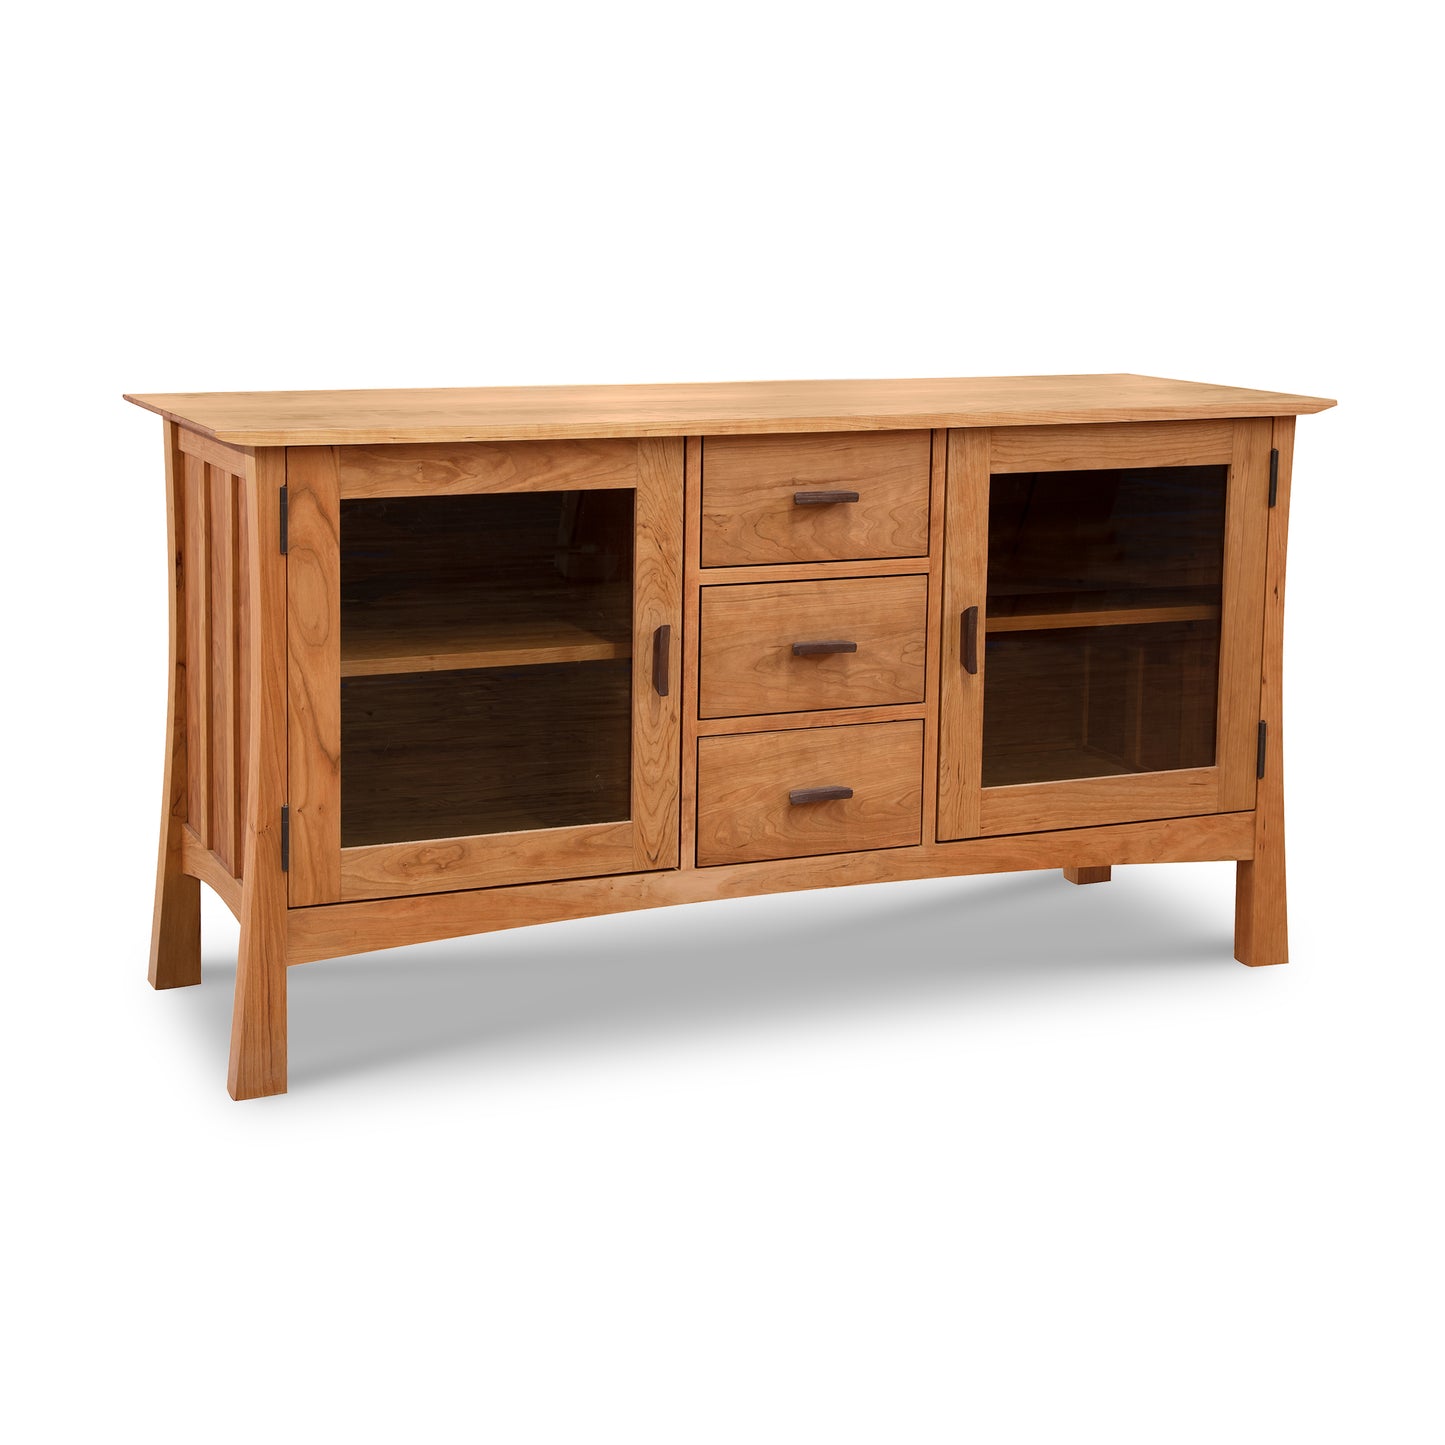 A solid wood, eco-friendly Vermont Furniture Designs Contemporary Craftsman 3-Drawer Media Console with glass-paneled doors on a white background.